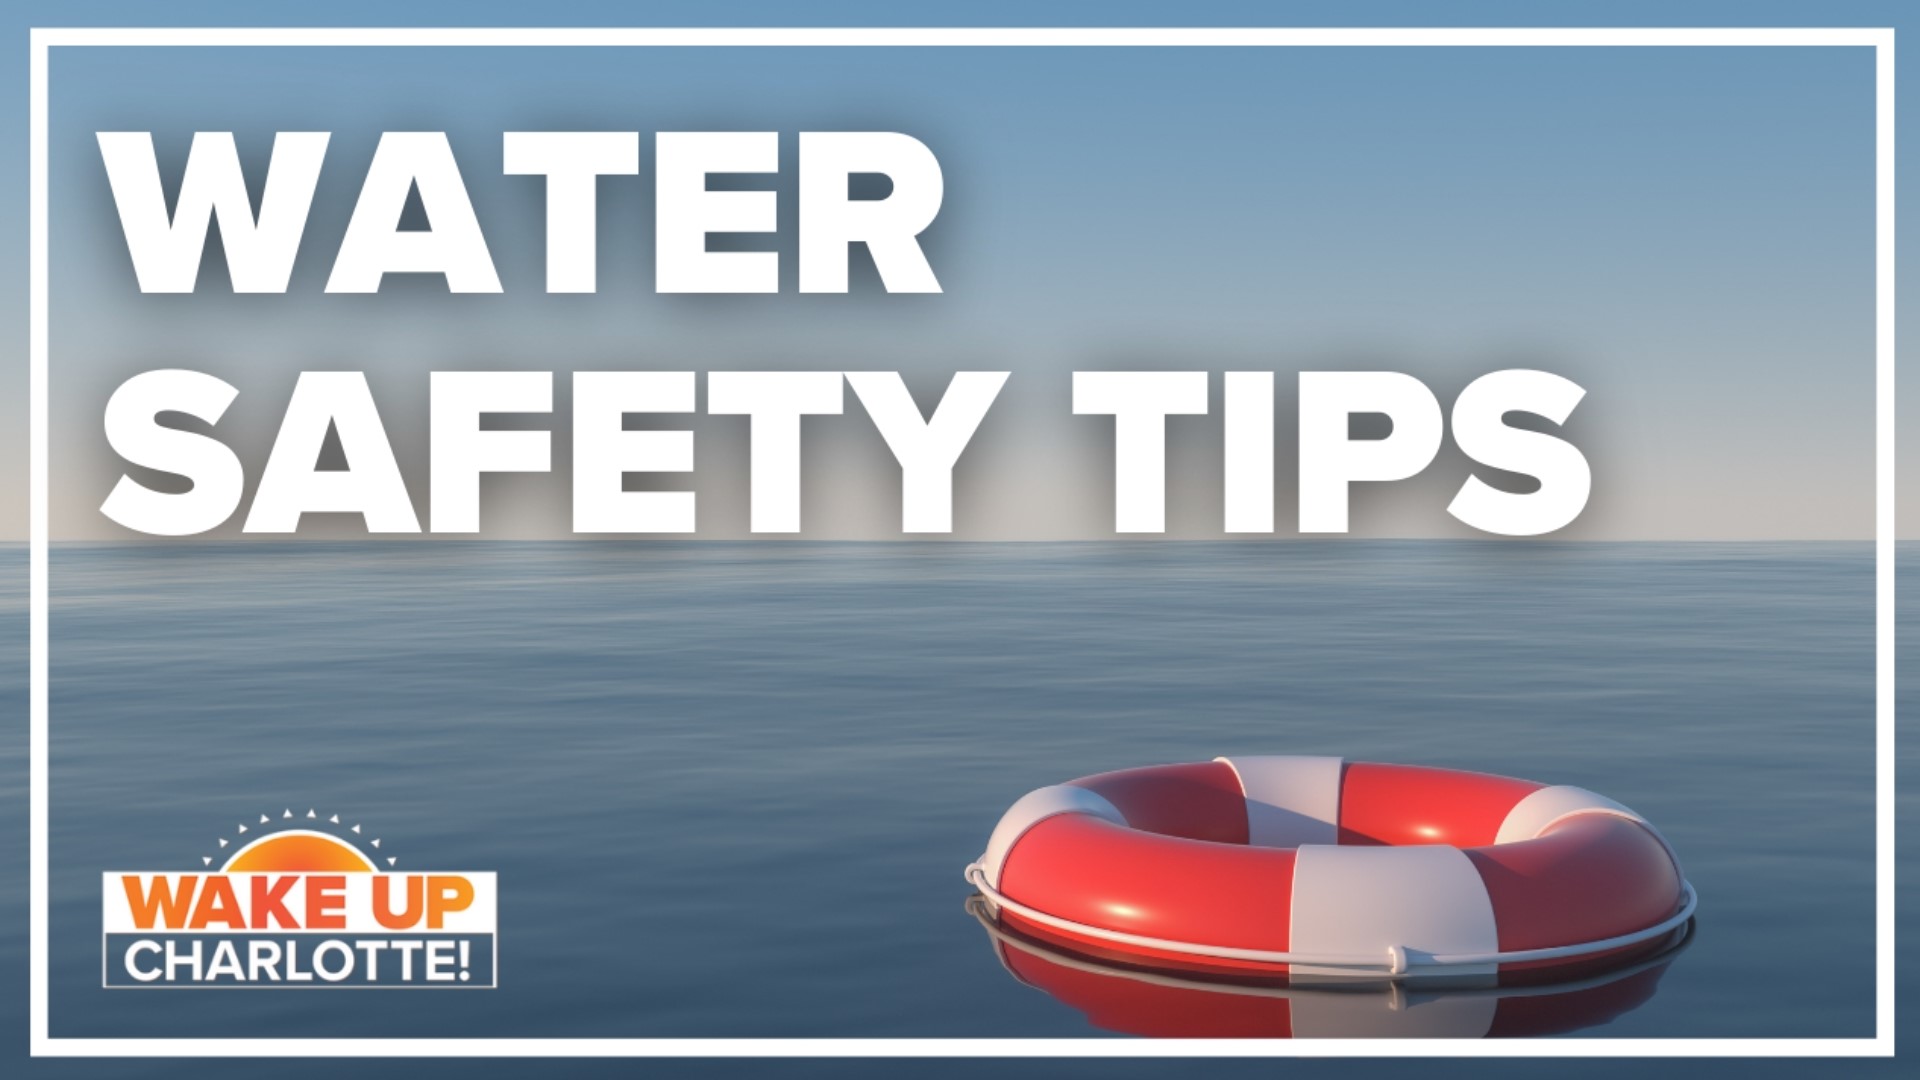 Officials in the Carolinas are working to keep you safe as you plan to hit the water this summer or spring.